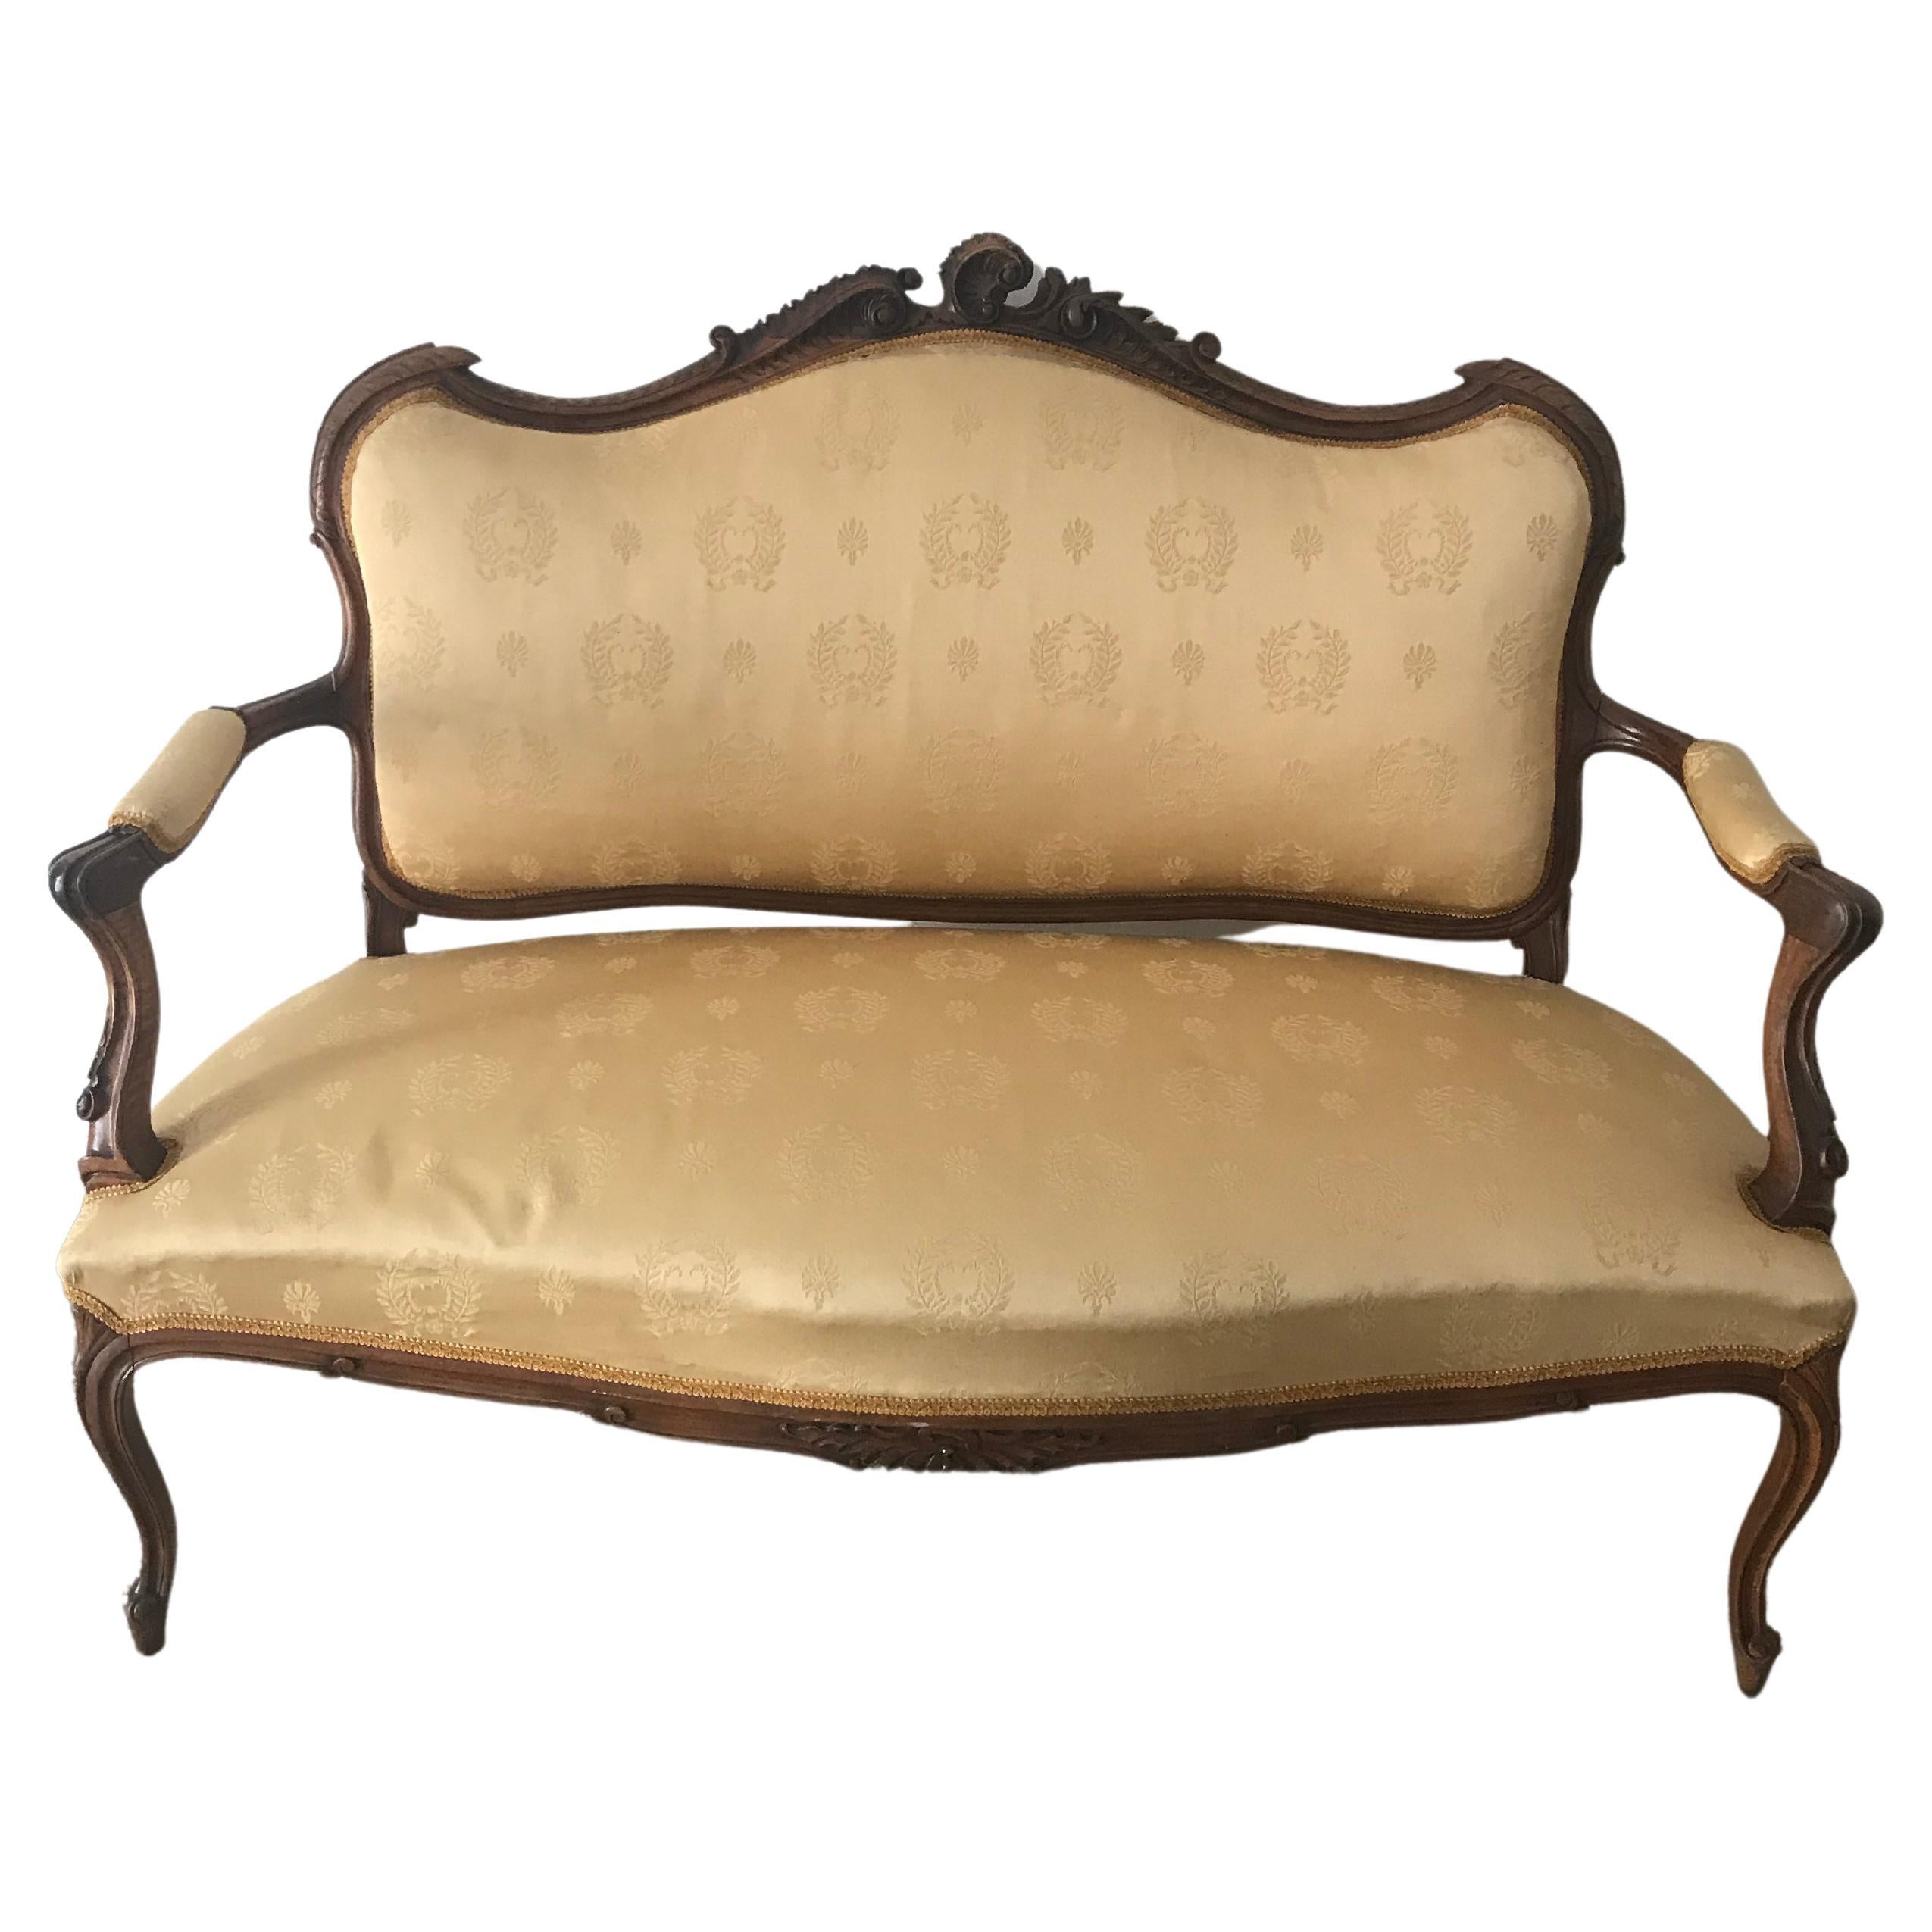 19th Century Antique French Louis XVI Sofa Settee Carved Walnut For Sale